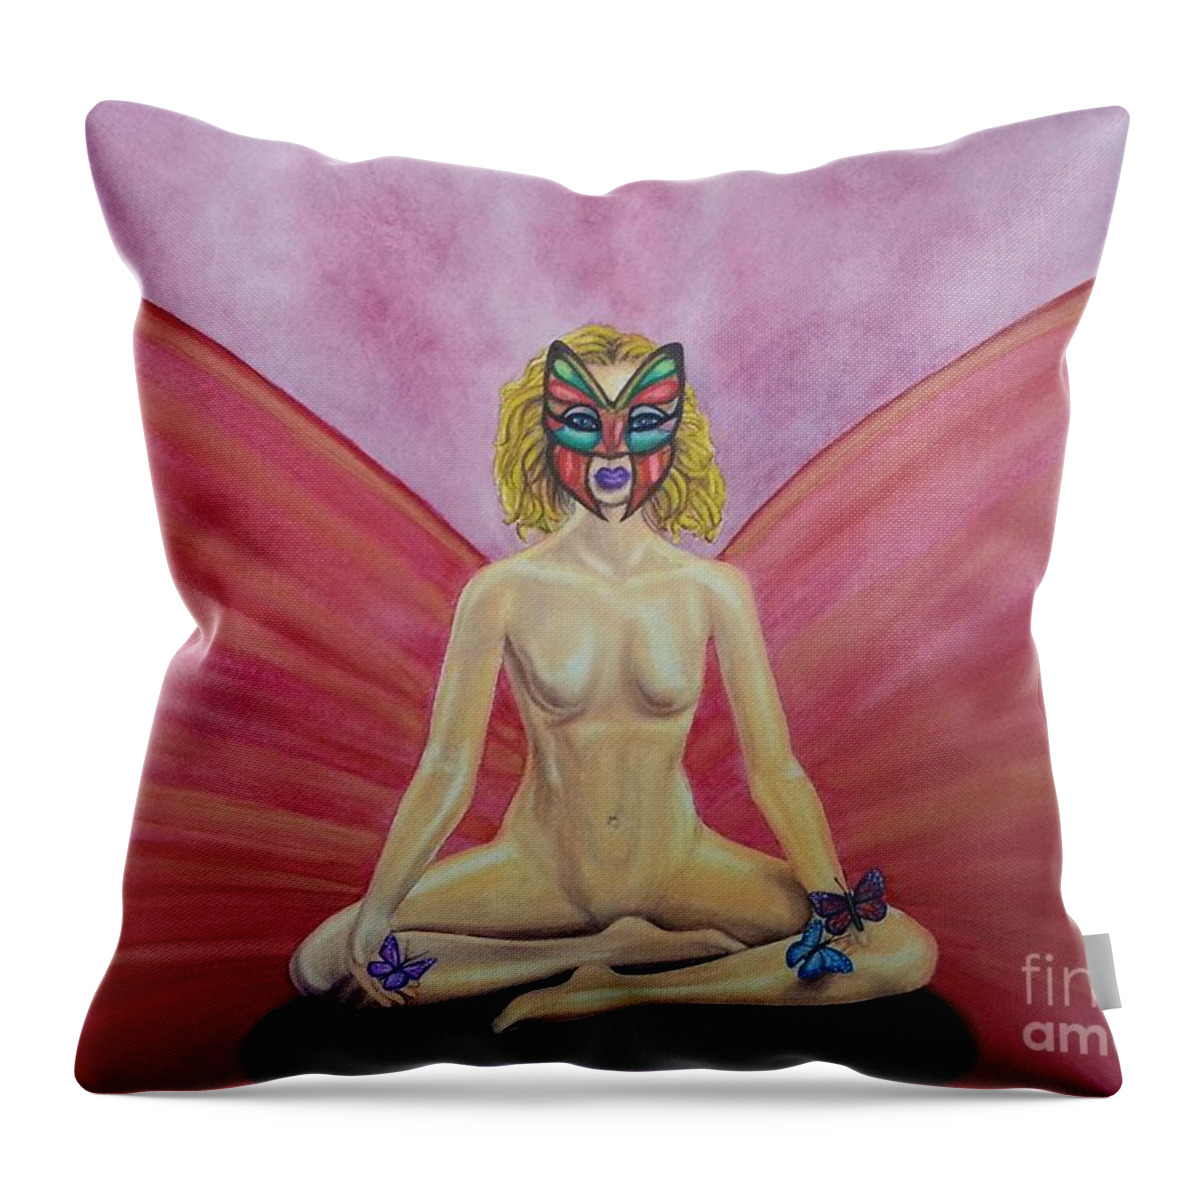 Butterfly Throw Pillow featuring the painting Butterfly Meditation by Steed Edwards